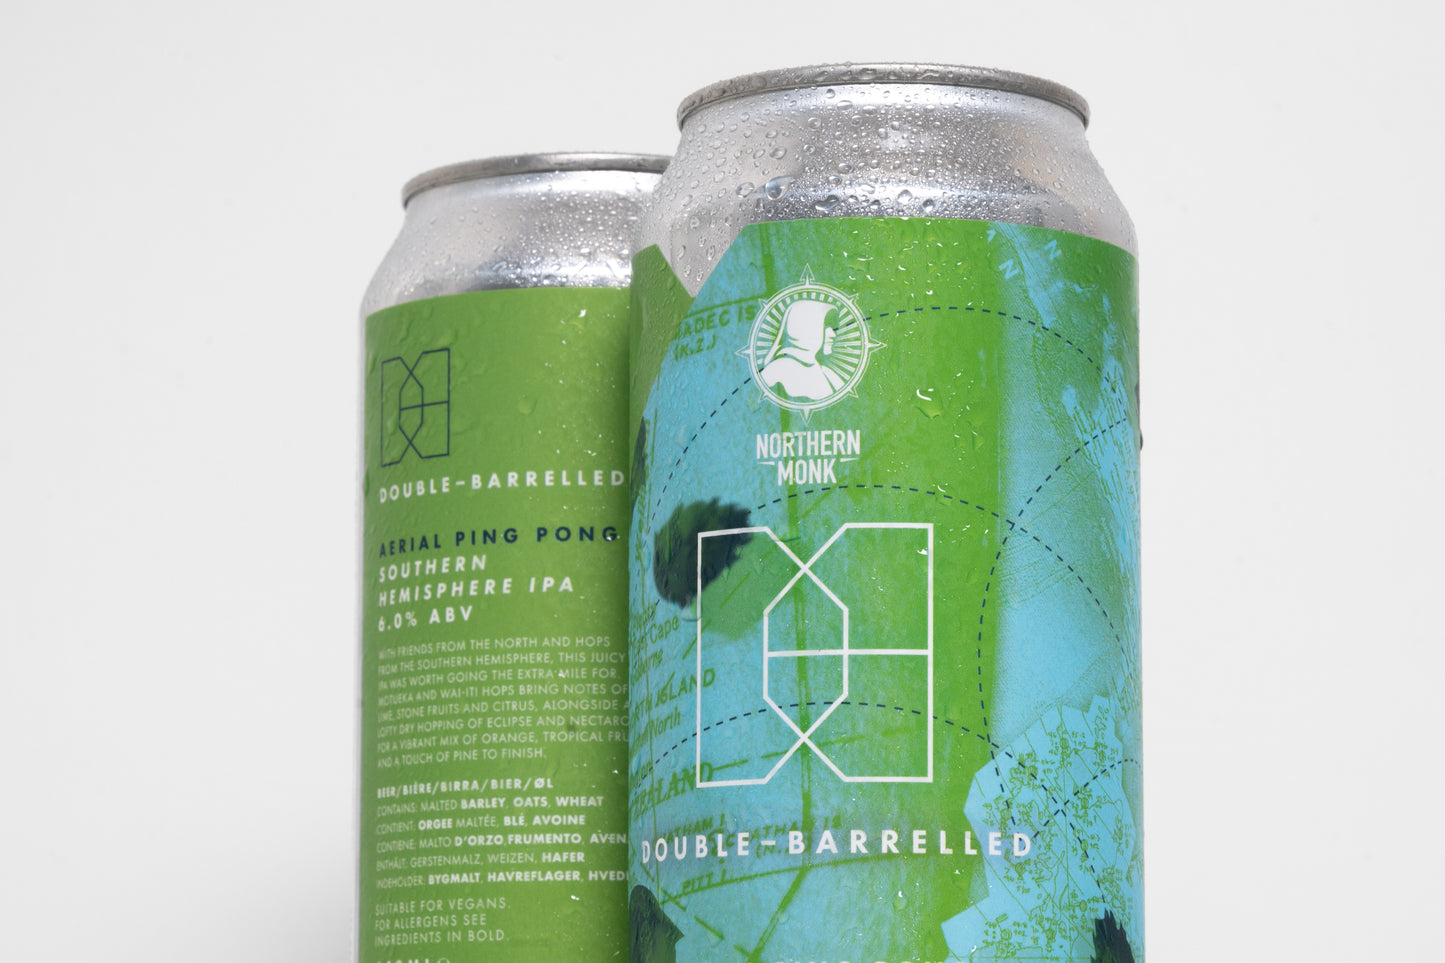 NORTHERN MONK // DOUBLE-BARRELLED // AERIAL PING PONG // SOUTHERN HEMISPHERE IPA